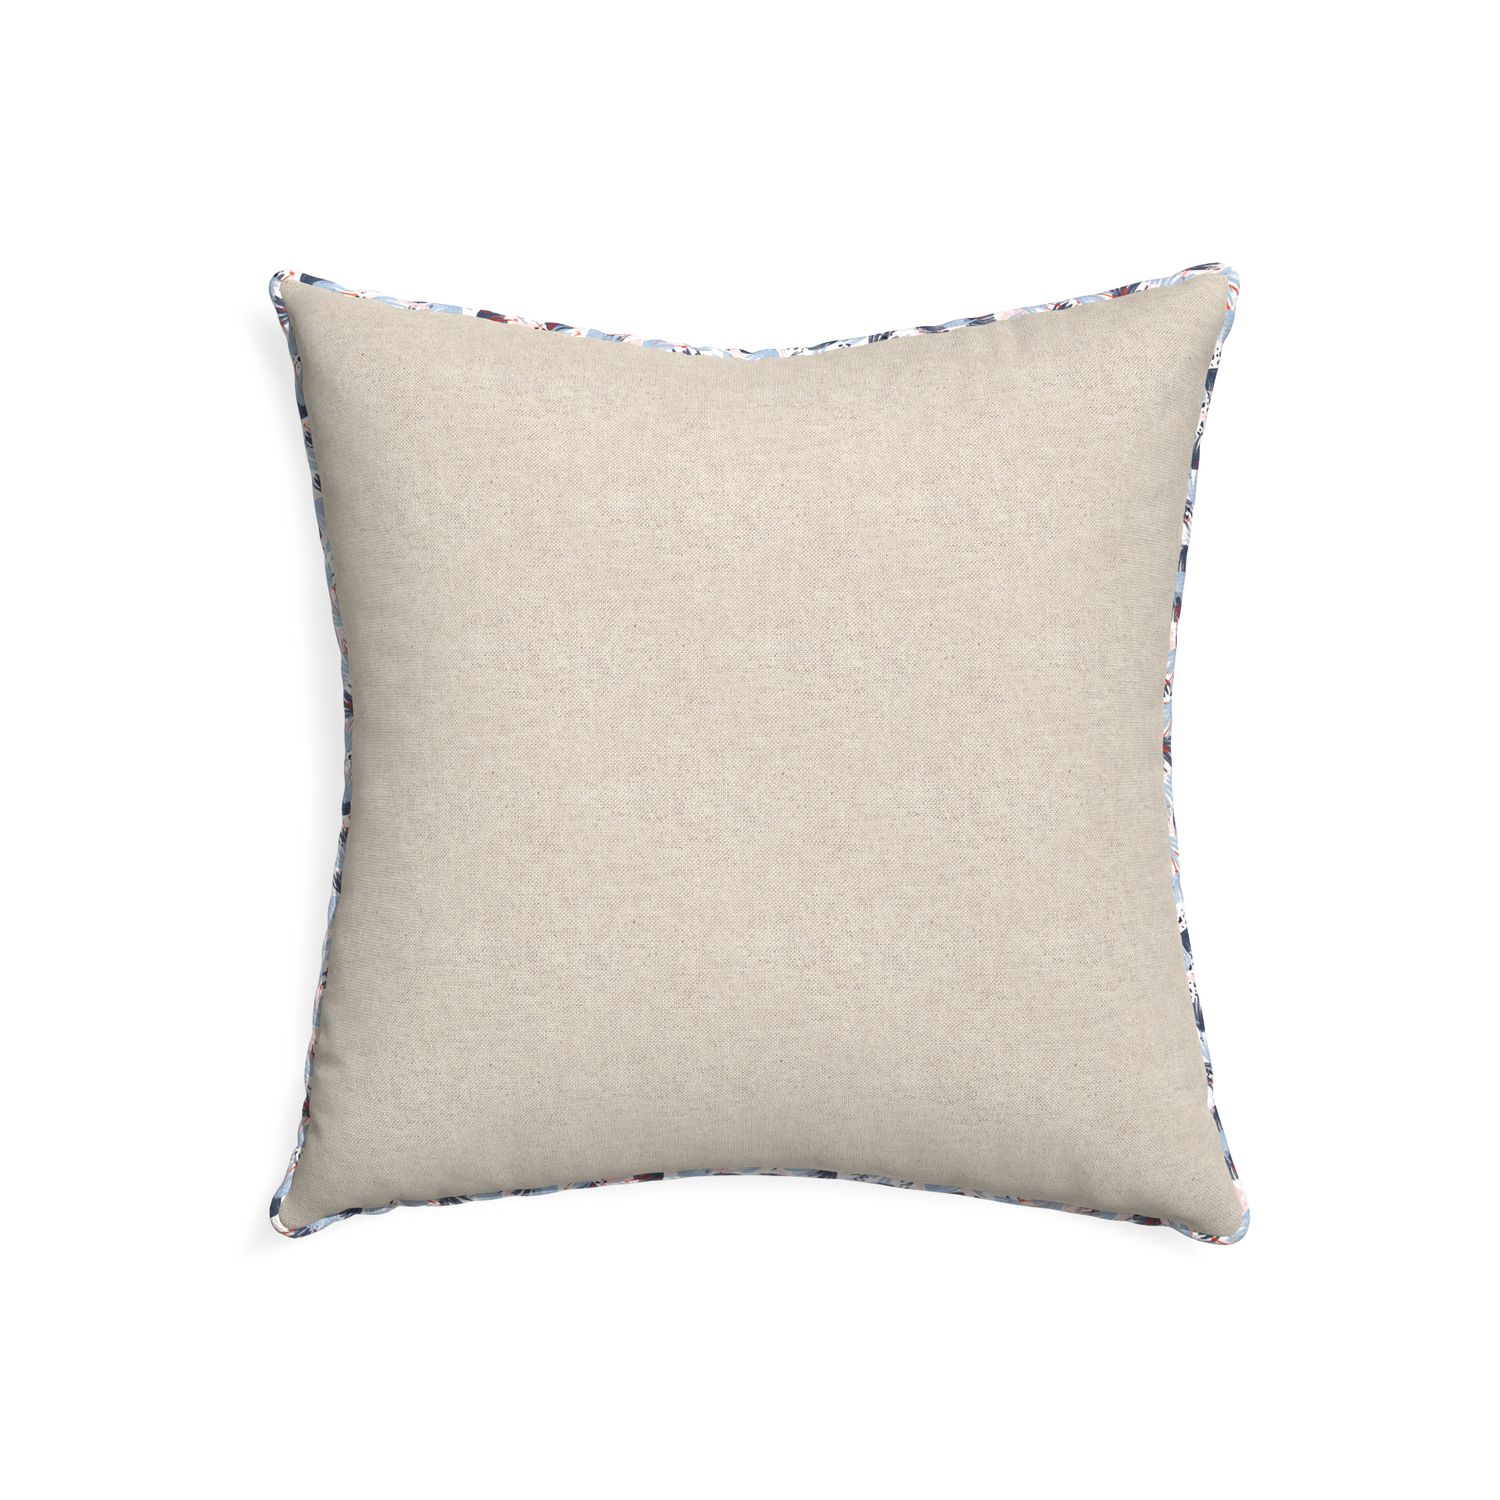 22-square oat custom light brownpillow with e piping on white background